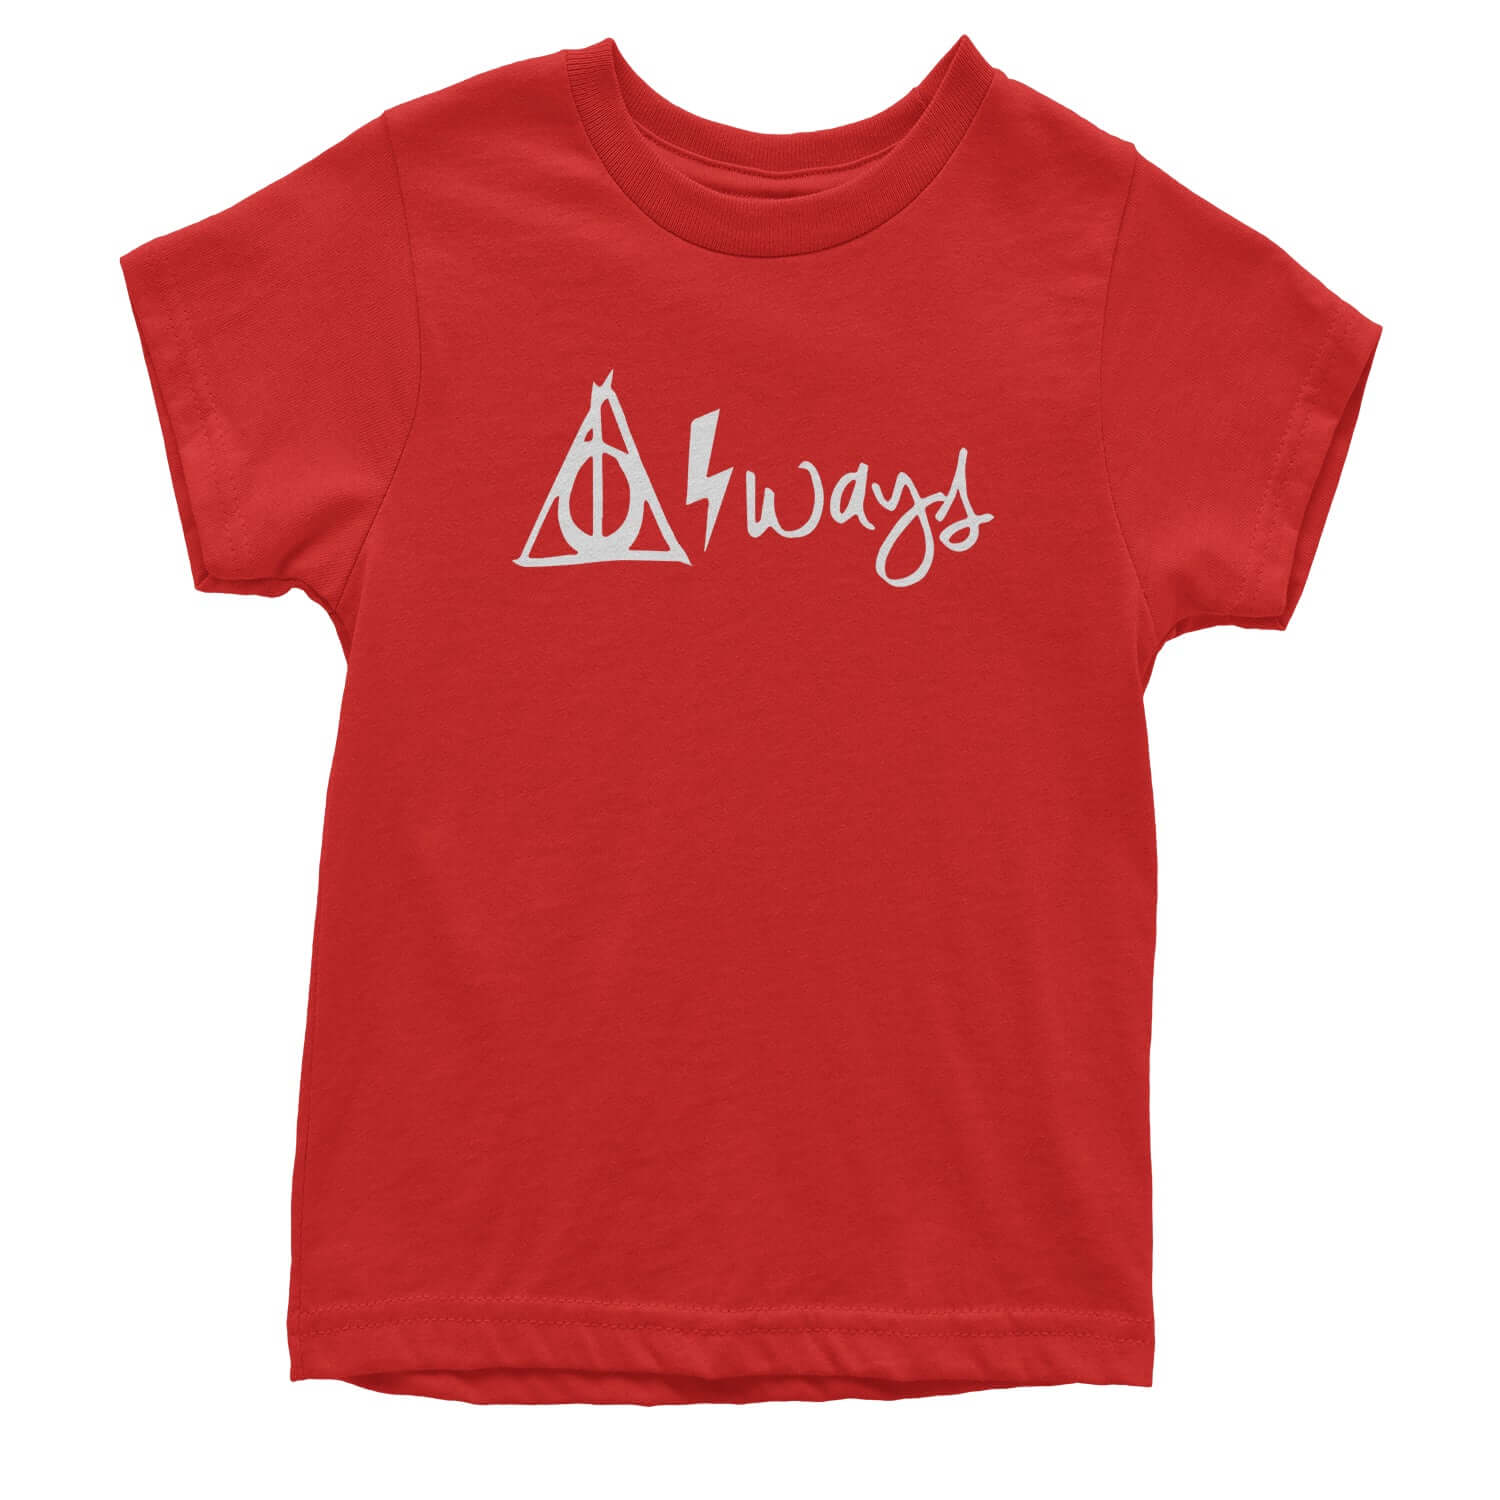 Always Lightning Bolt Youth T-shirt #expressiontees by Expression Tees